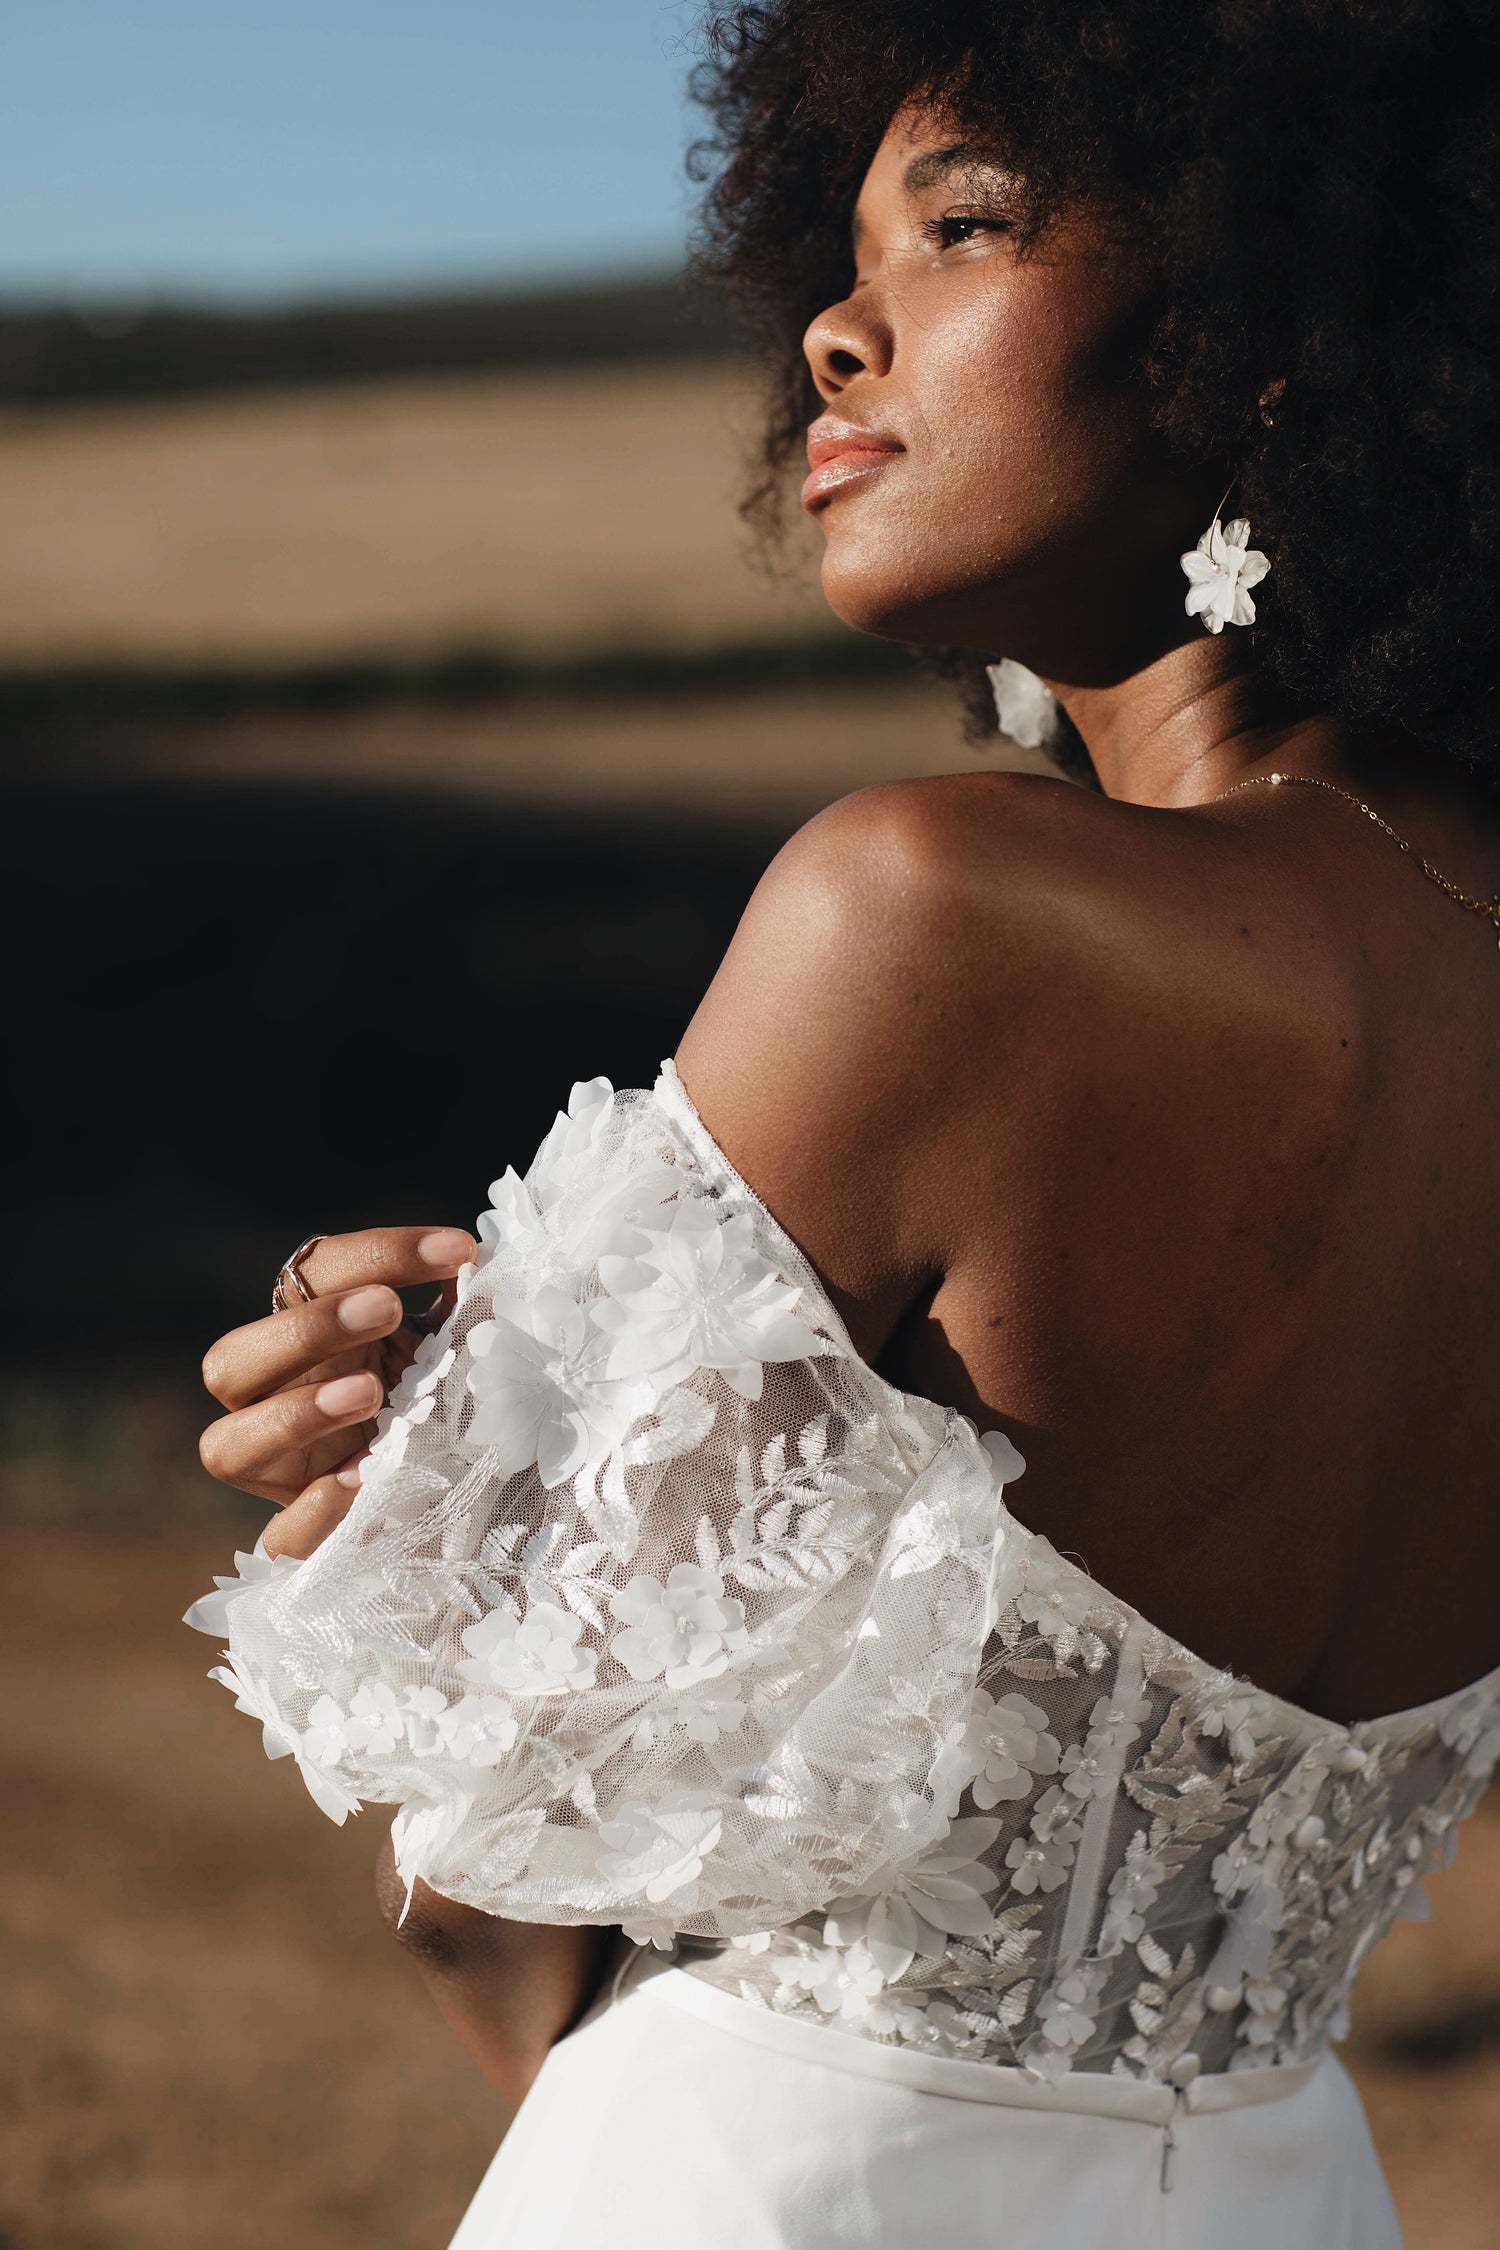 A woman with black curly hair is looking in the distance. The woman is wearing a drop shoulder floral bridal top and a white skirt, both designed by Kelsey Rose Bridal